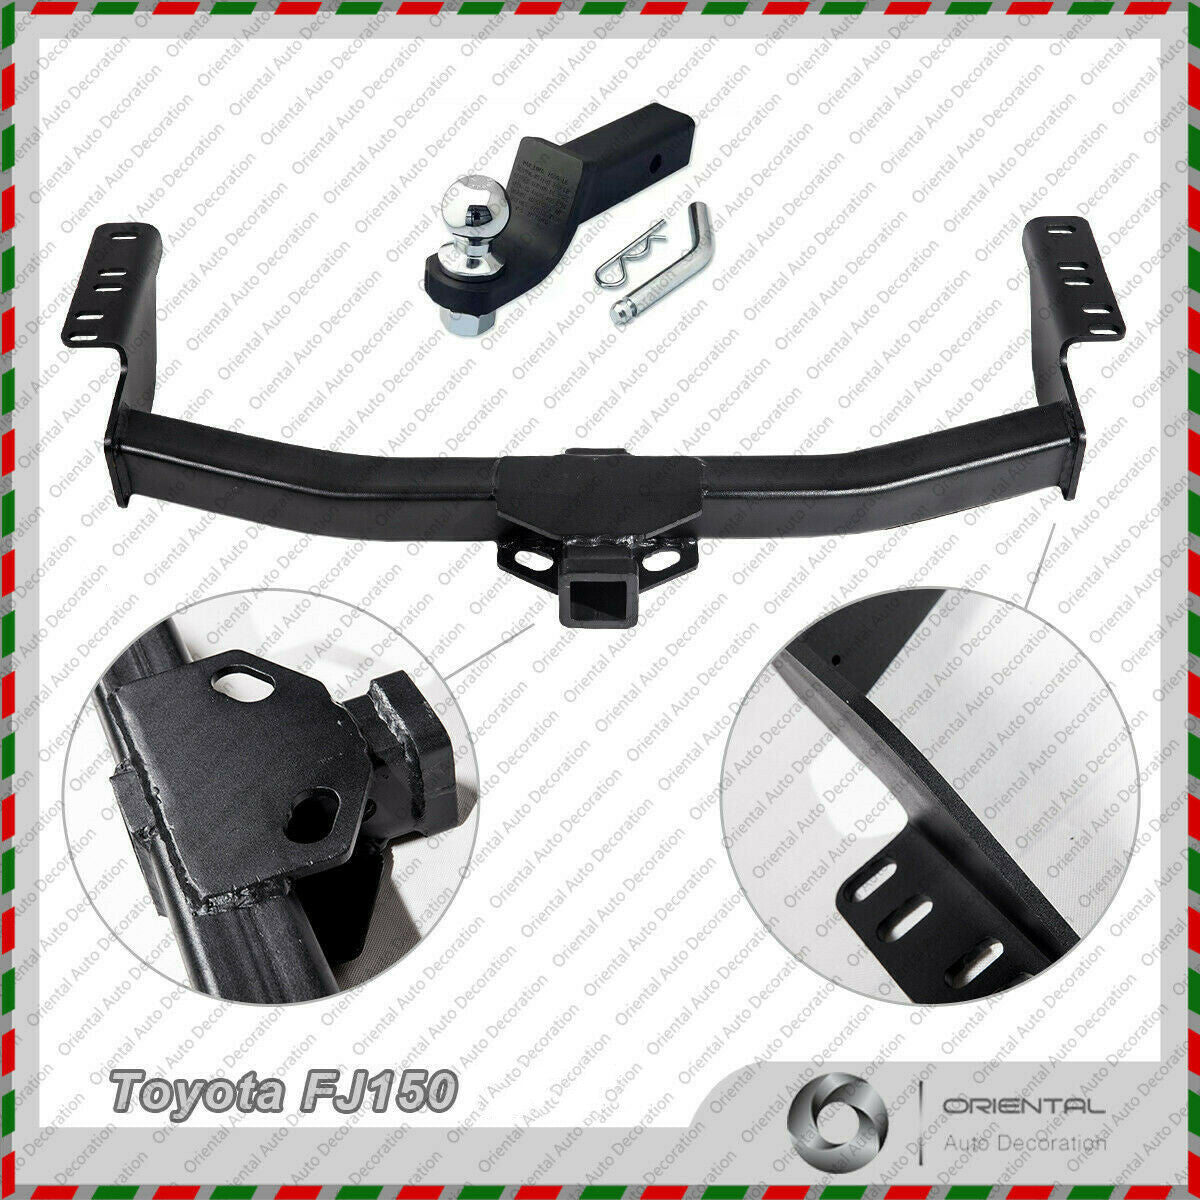 Heavy Duty 2" Tow Bar Tongue + Tow Ball for Toyota Prado 150 2010-2014 Pick Up Only